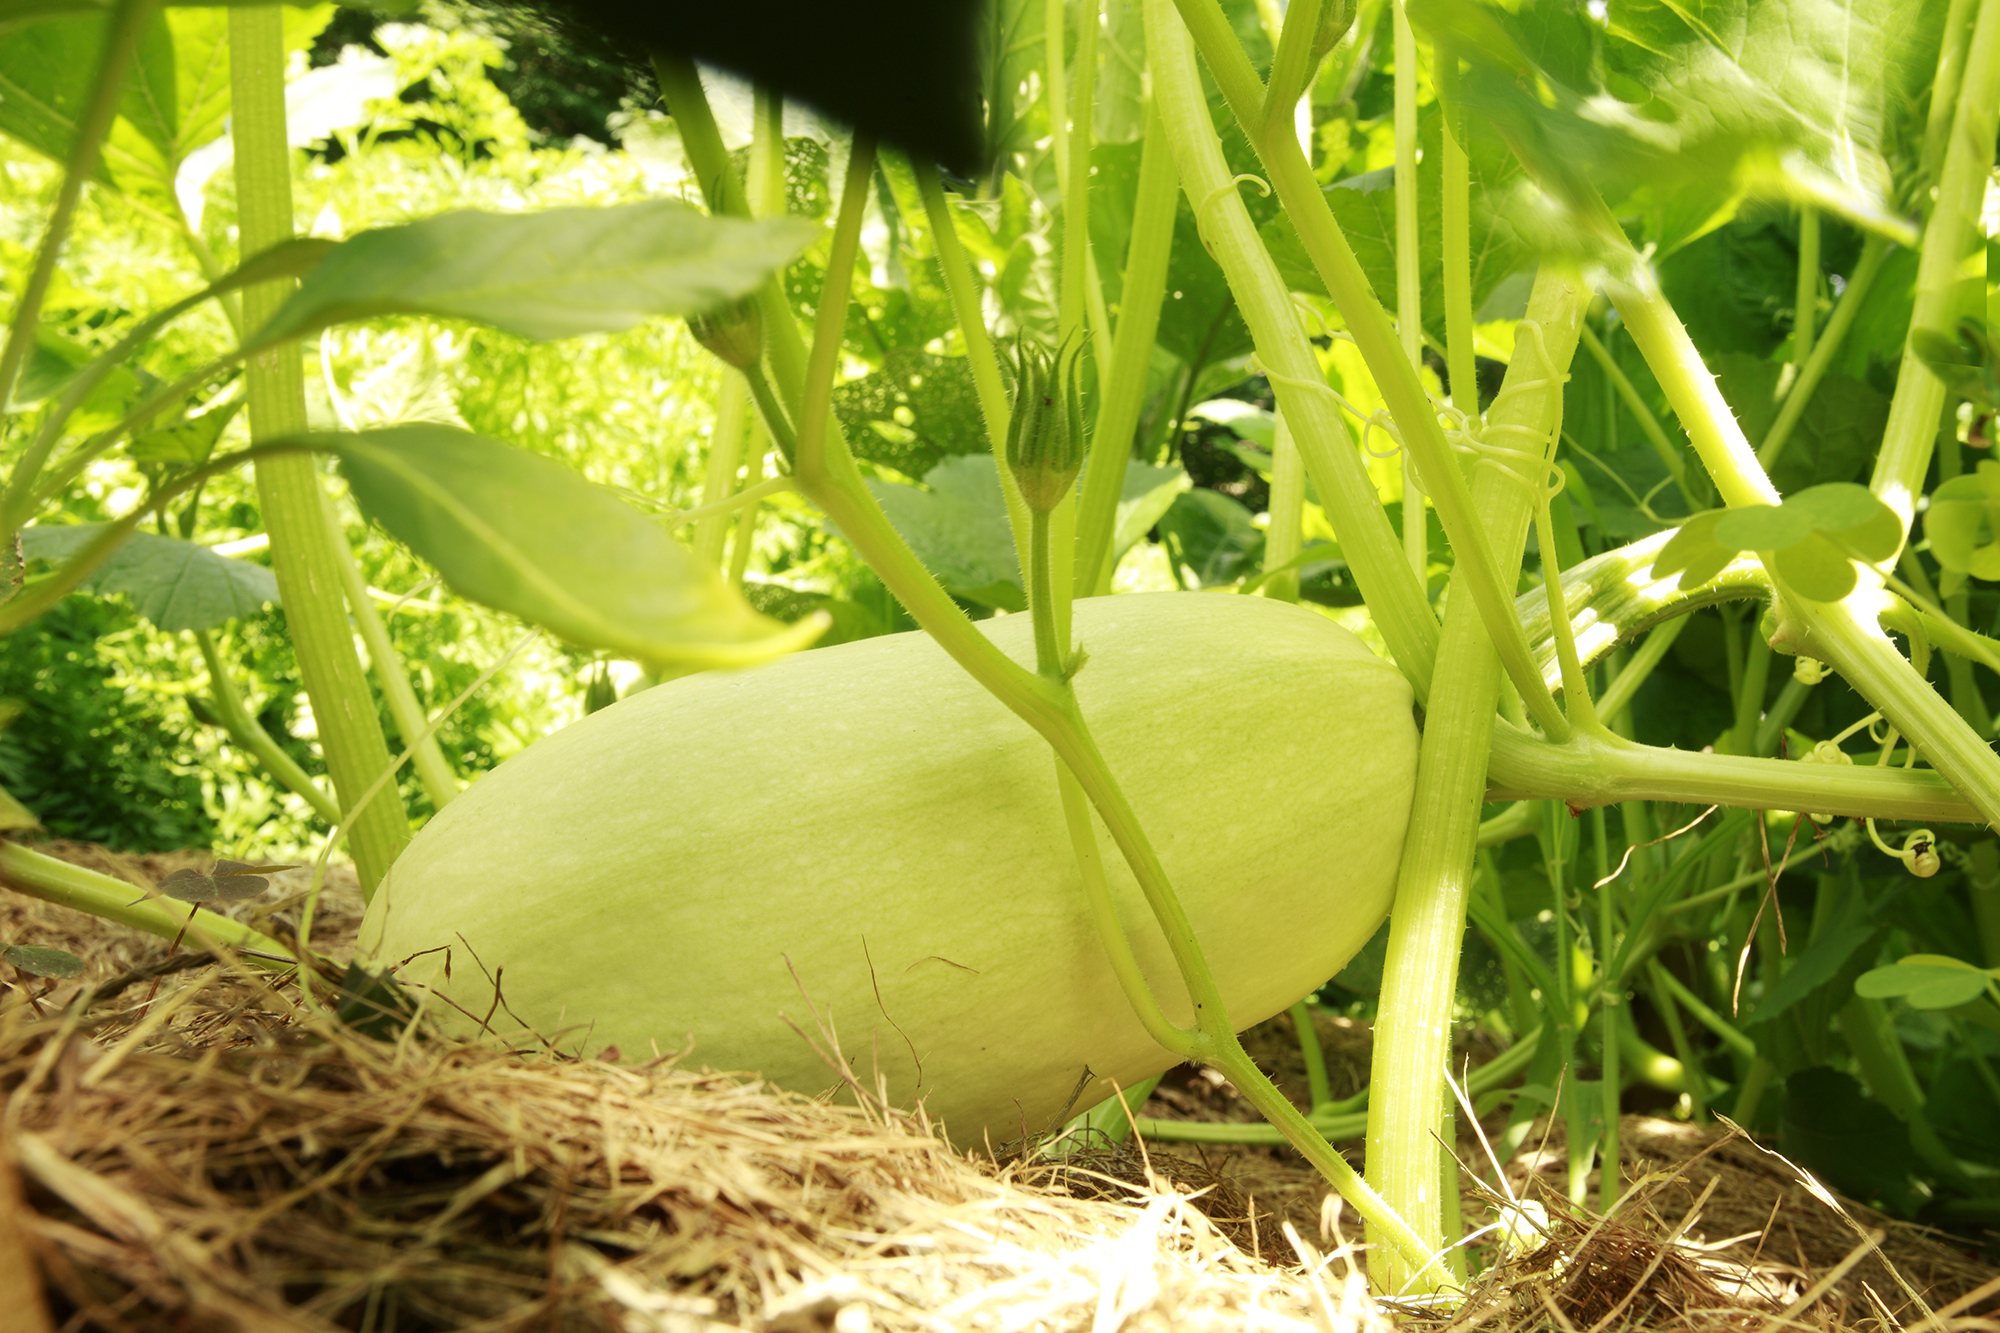 When to harvest butternut squash: for a tasty crop